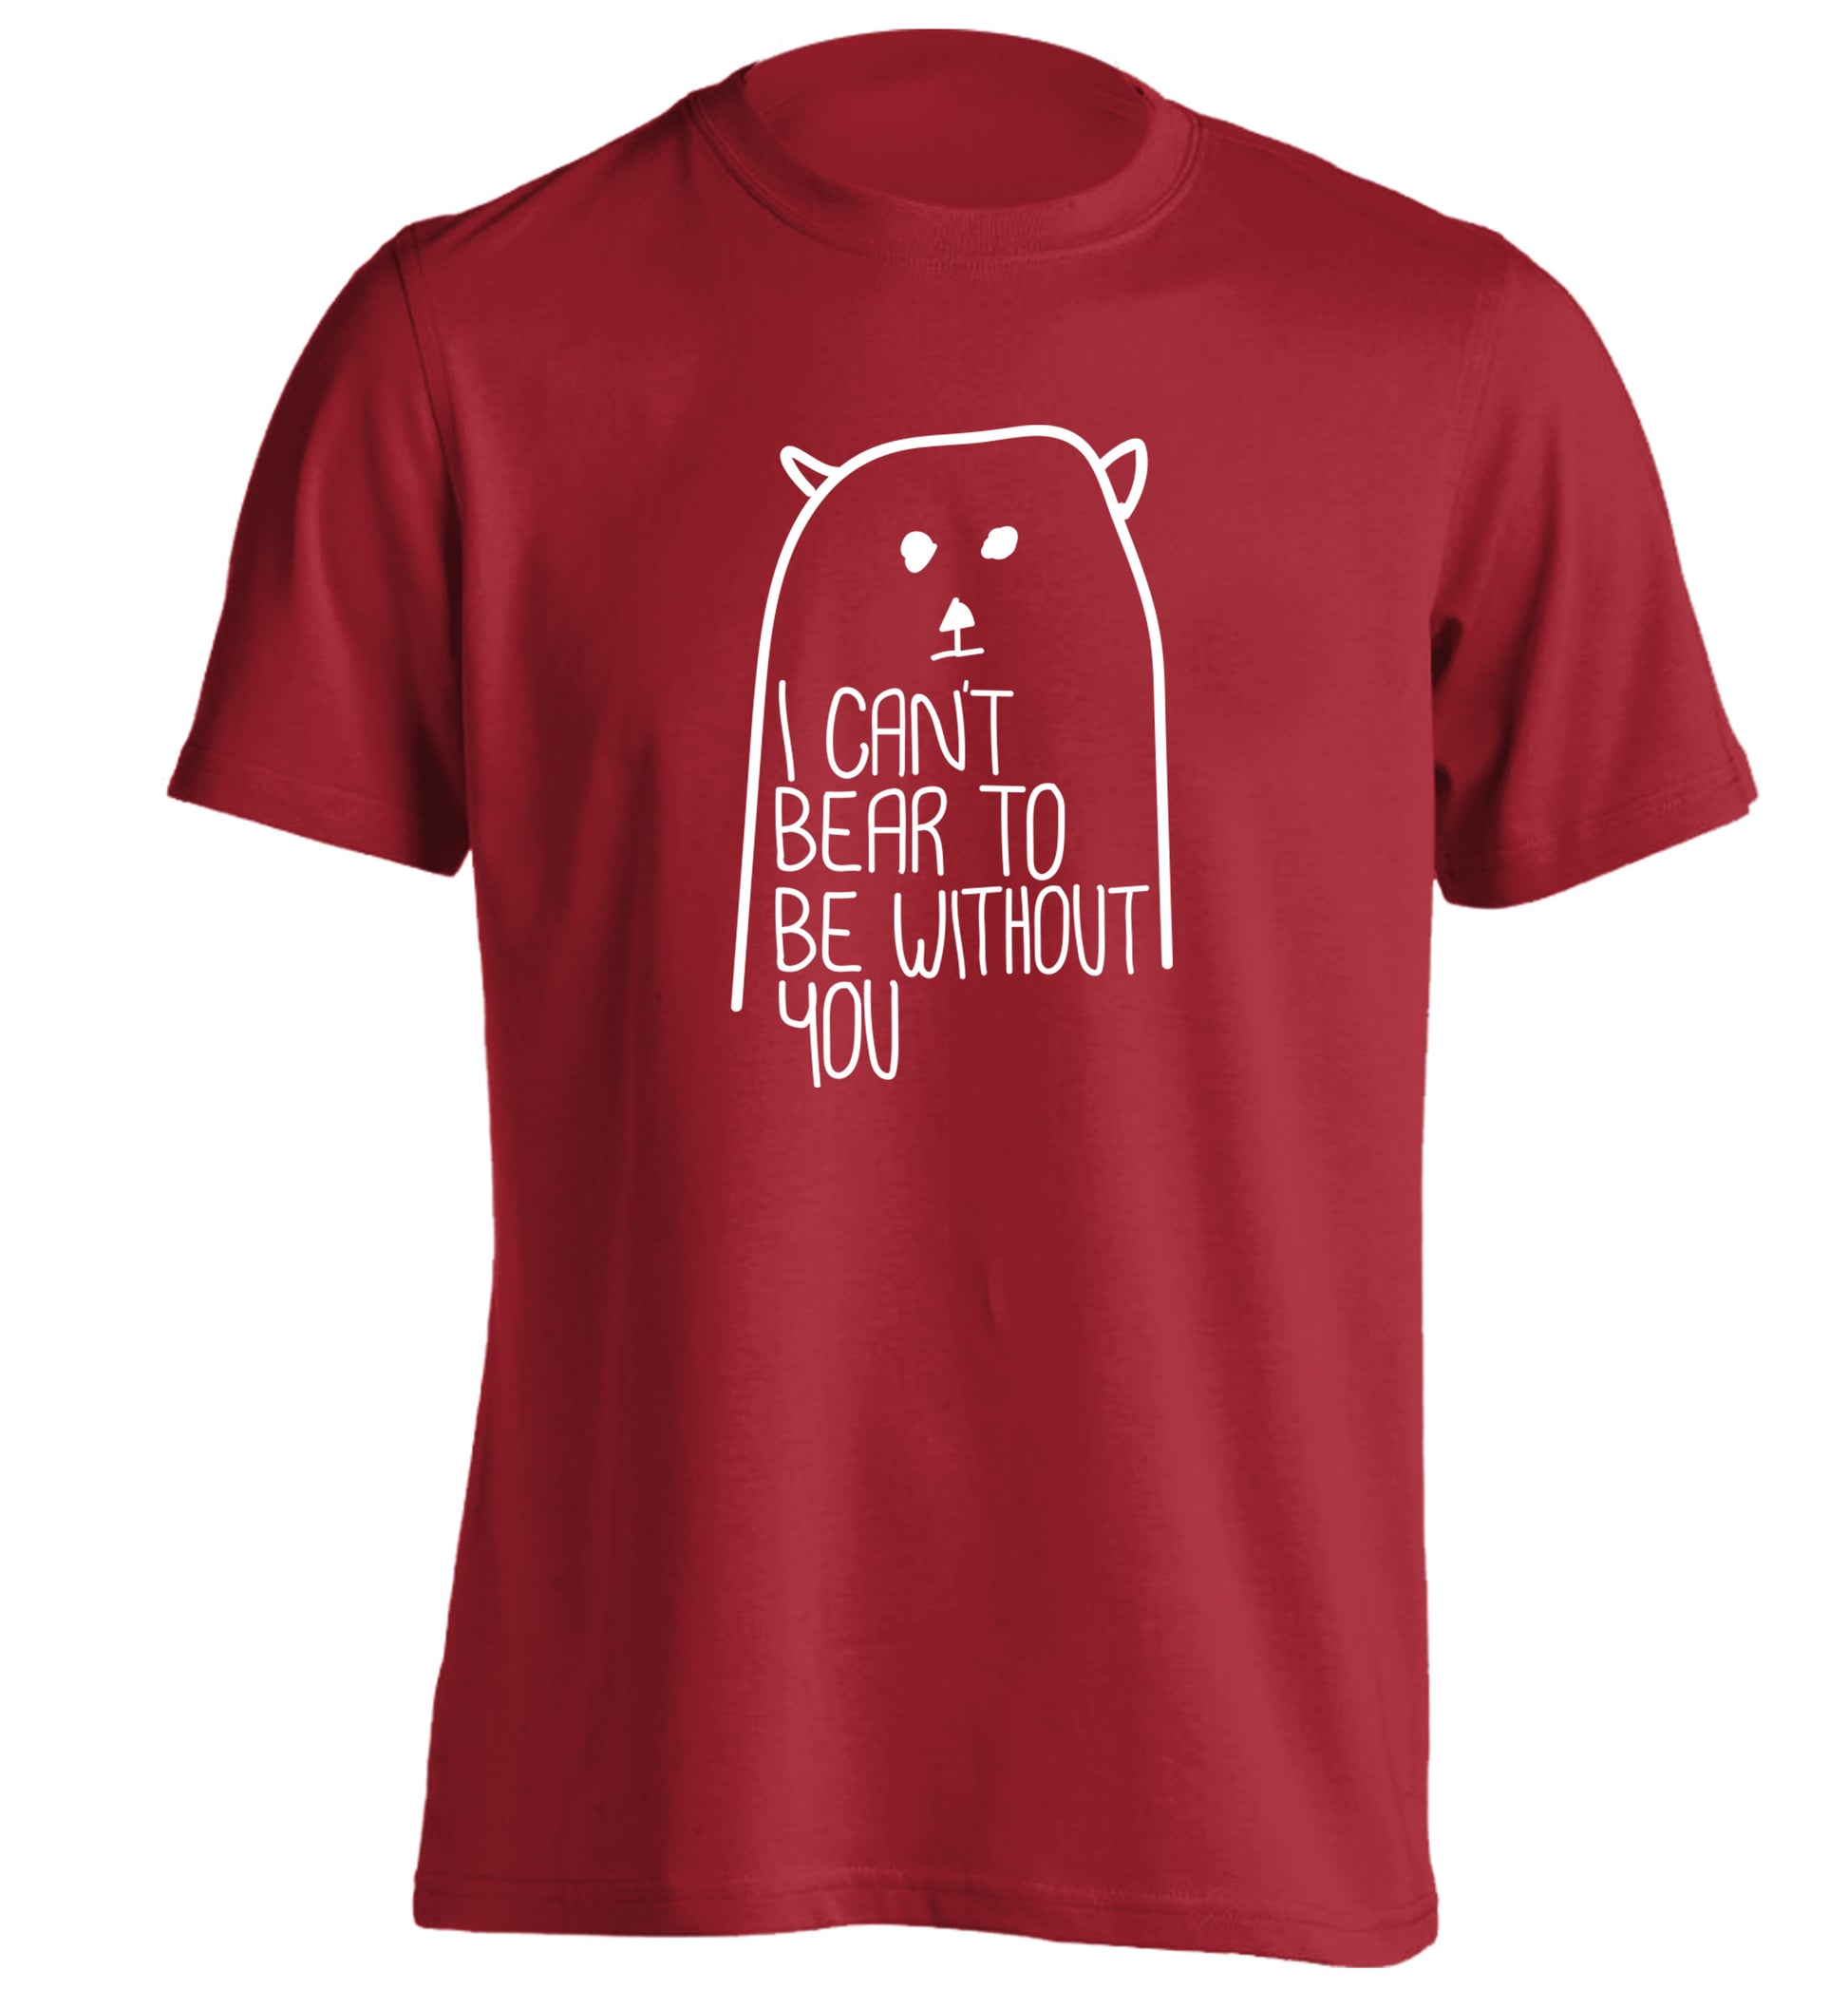 I can't bear to be without you adults unisex red Tshirt 2XL